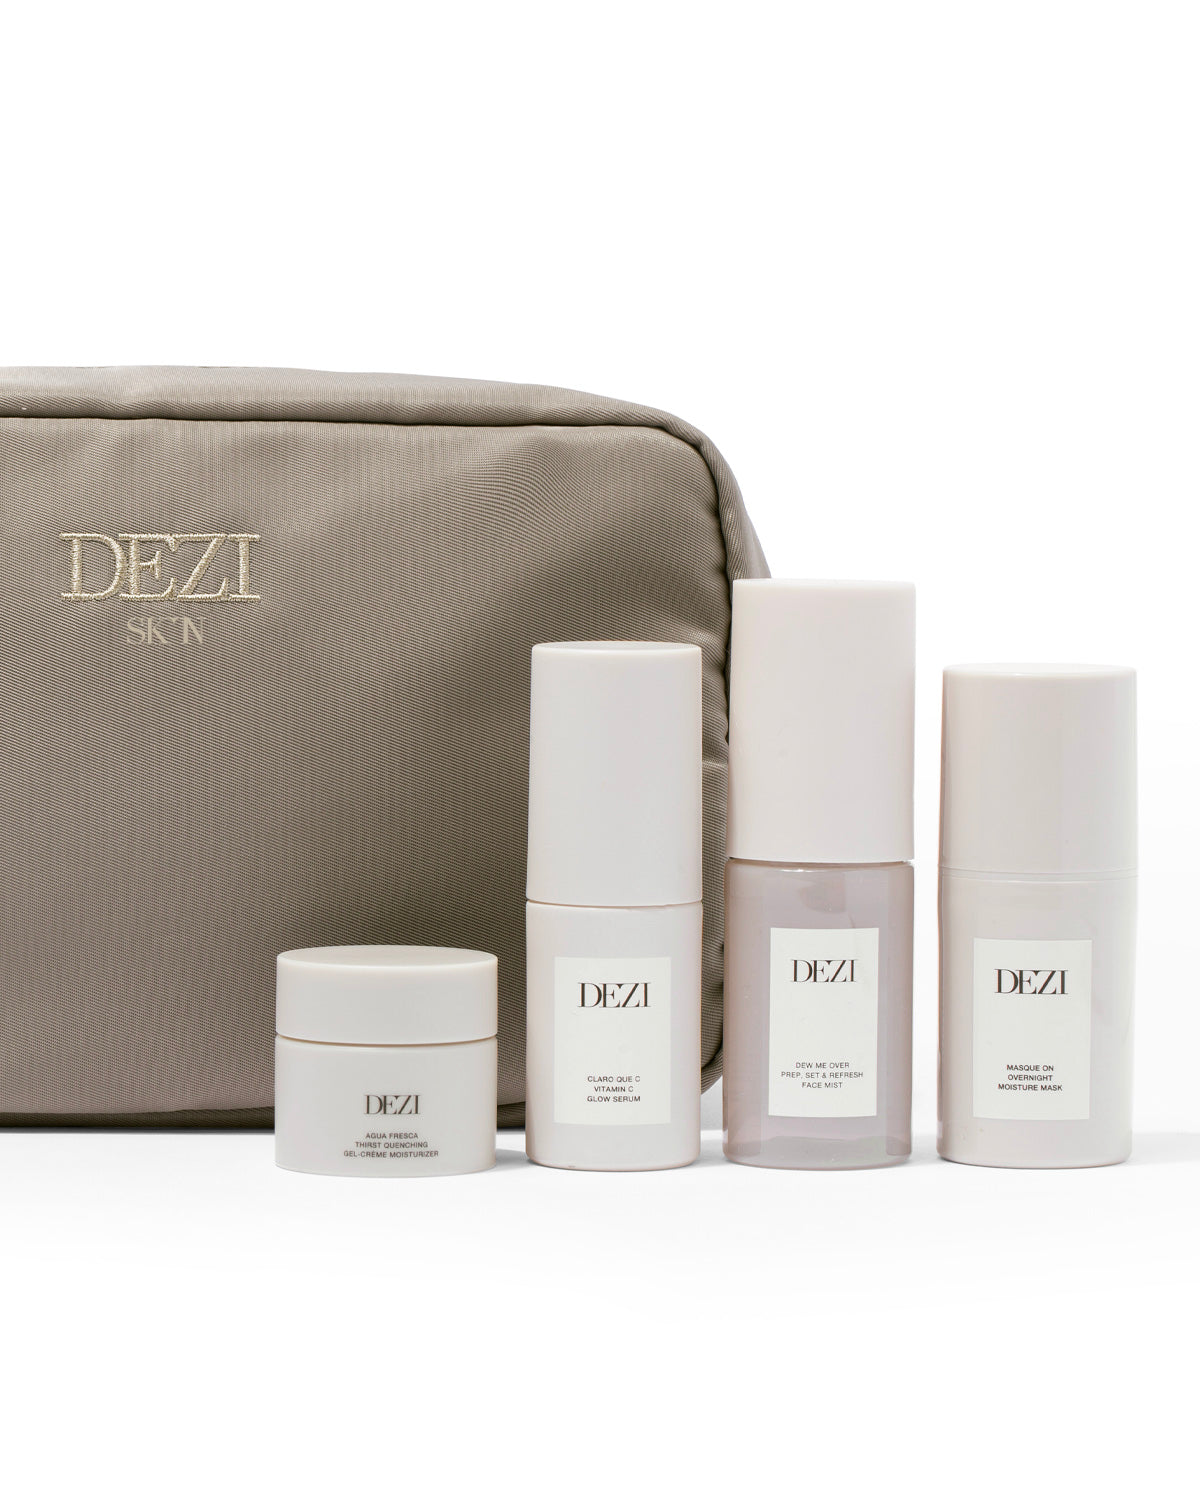 The four mini travel size skincare products are sitting in front of the travel cosmetic bag. 